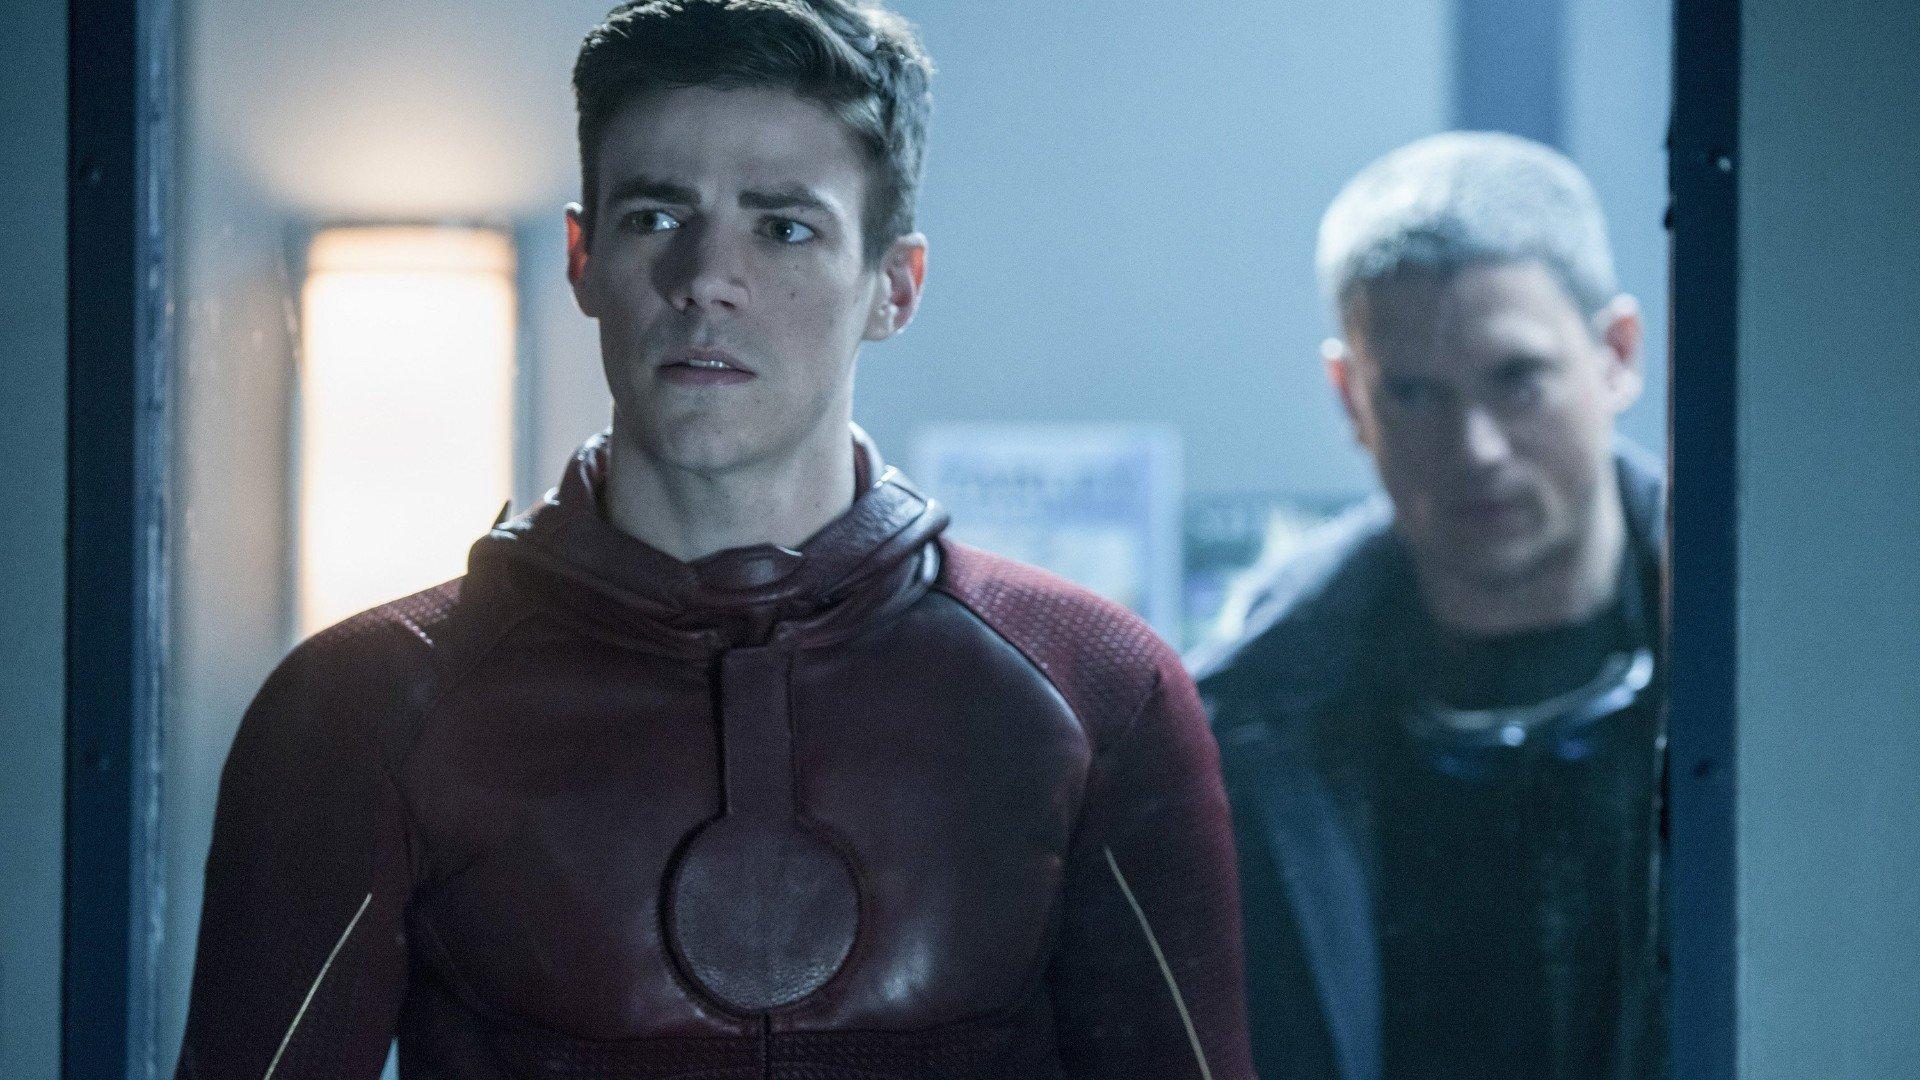 S3 Ep16 - The Flash